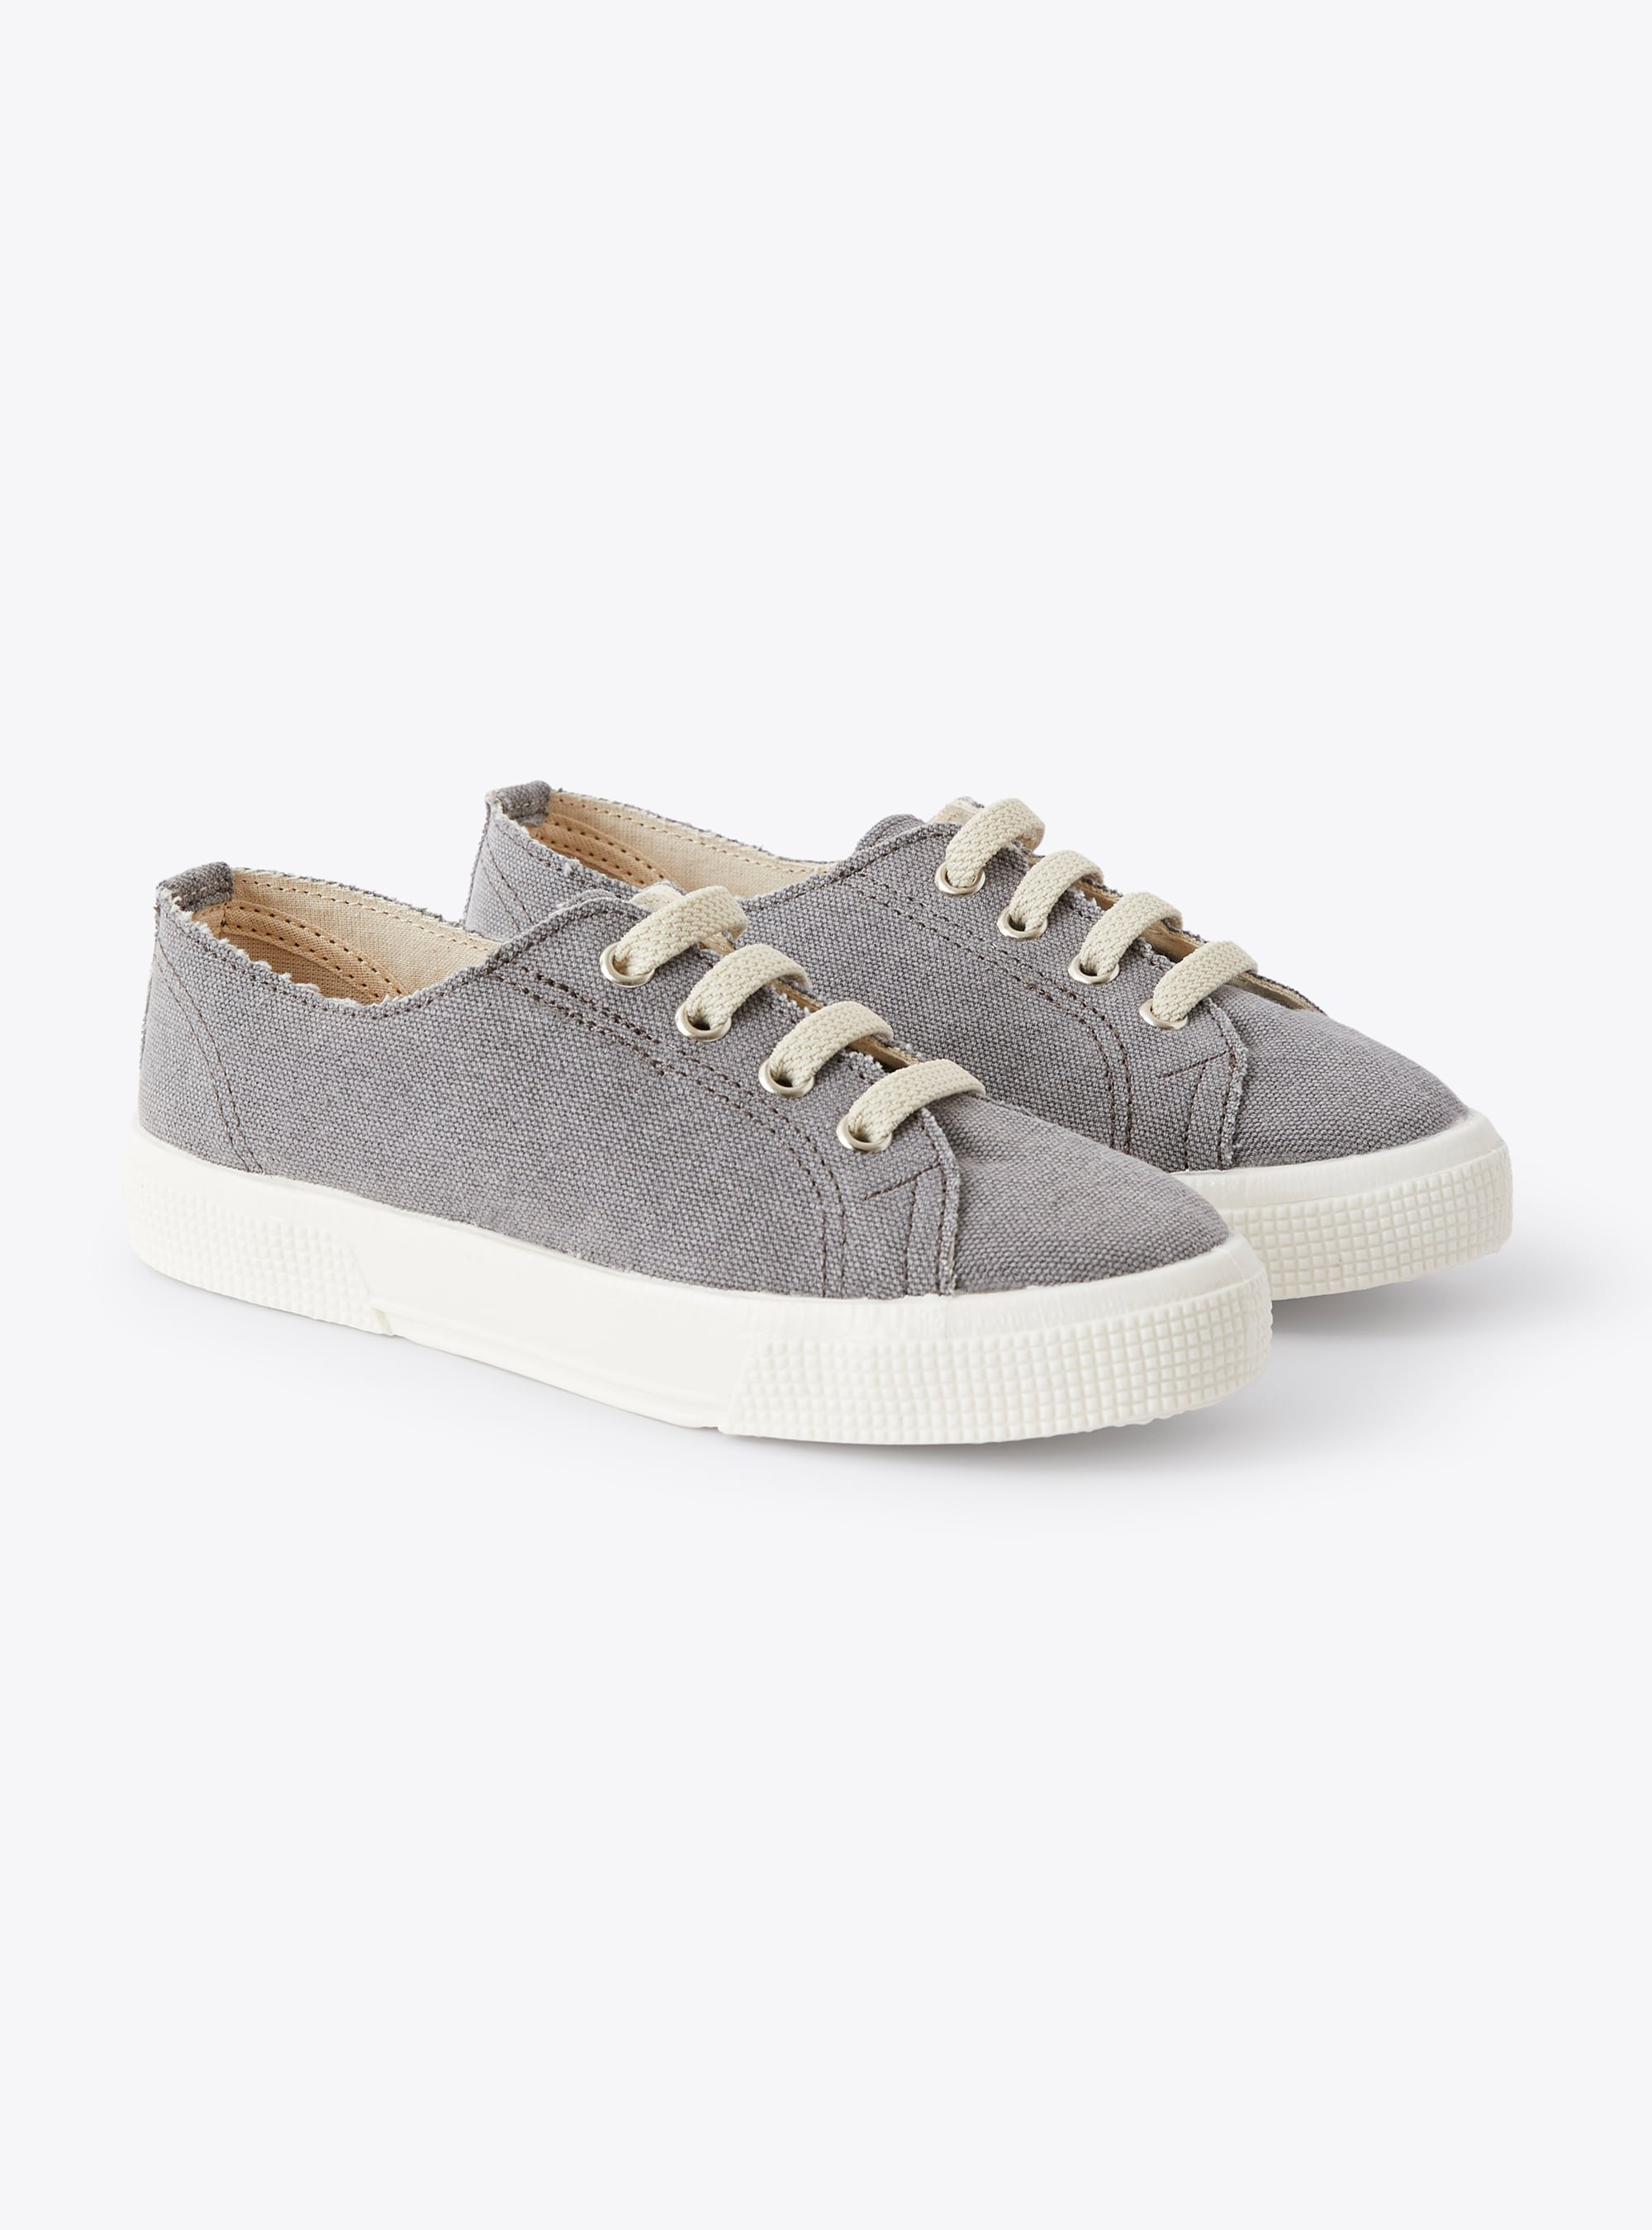 Sneaker in grey canvas with laces - Grey | Il Gufo